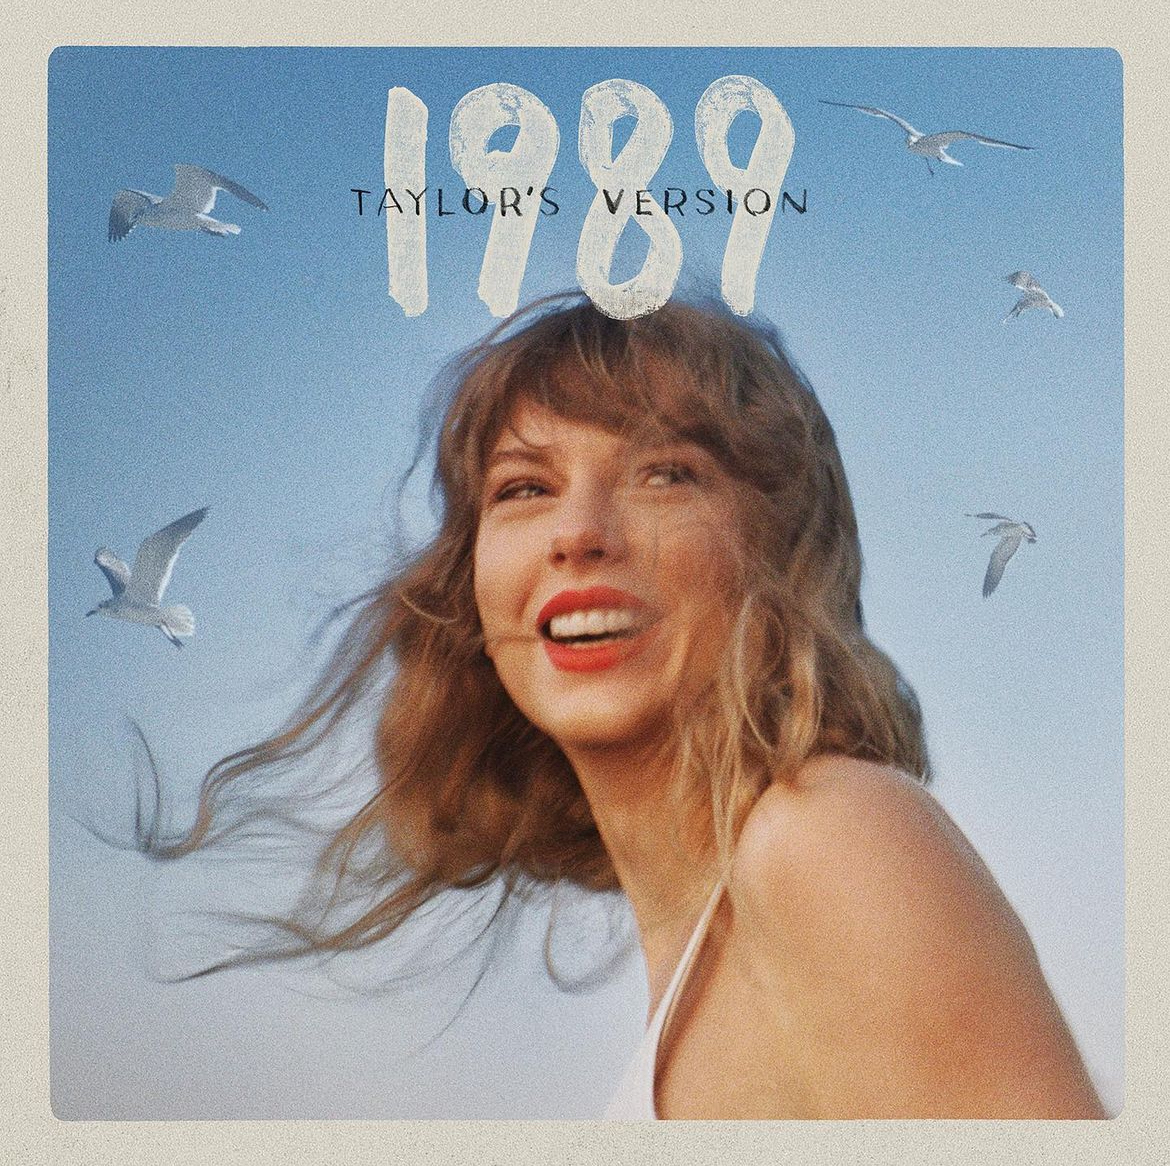 Album cover of 1989 (Taylors Version), created by Beth Garrabrant. Cover courtesy of Republic Records. 